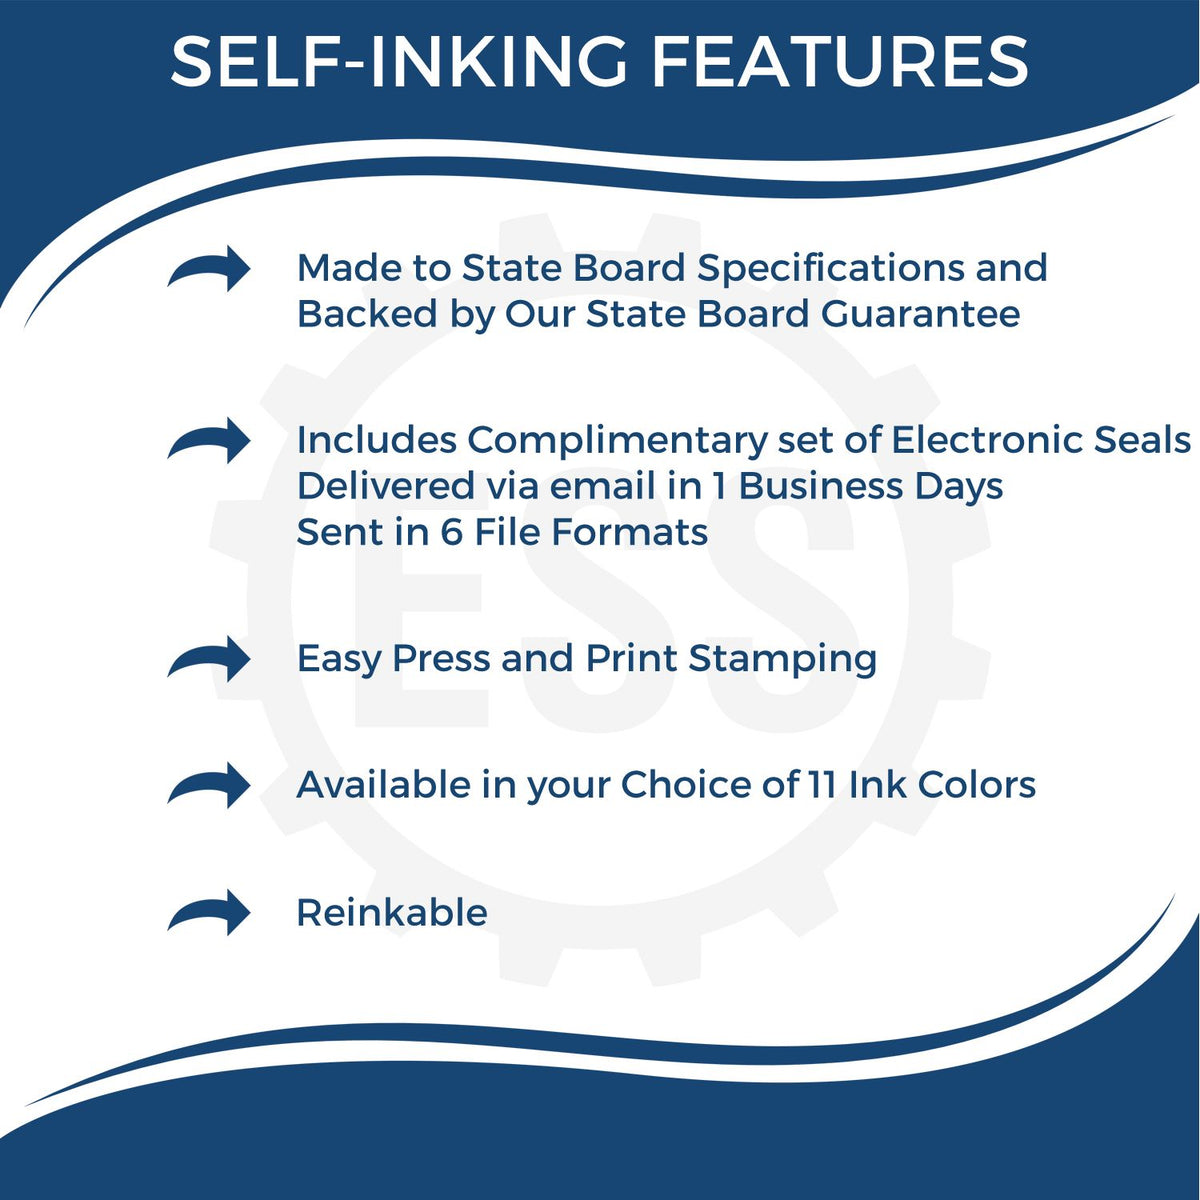 A picture of an infographic highlighting the selling points for the Self-Inking Connecticut Geologist Stamp